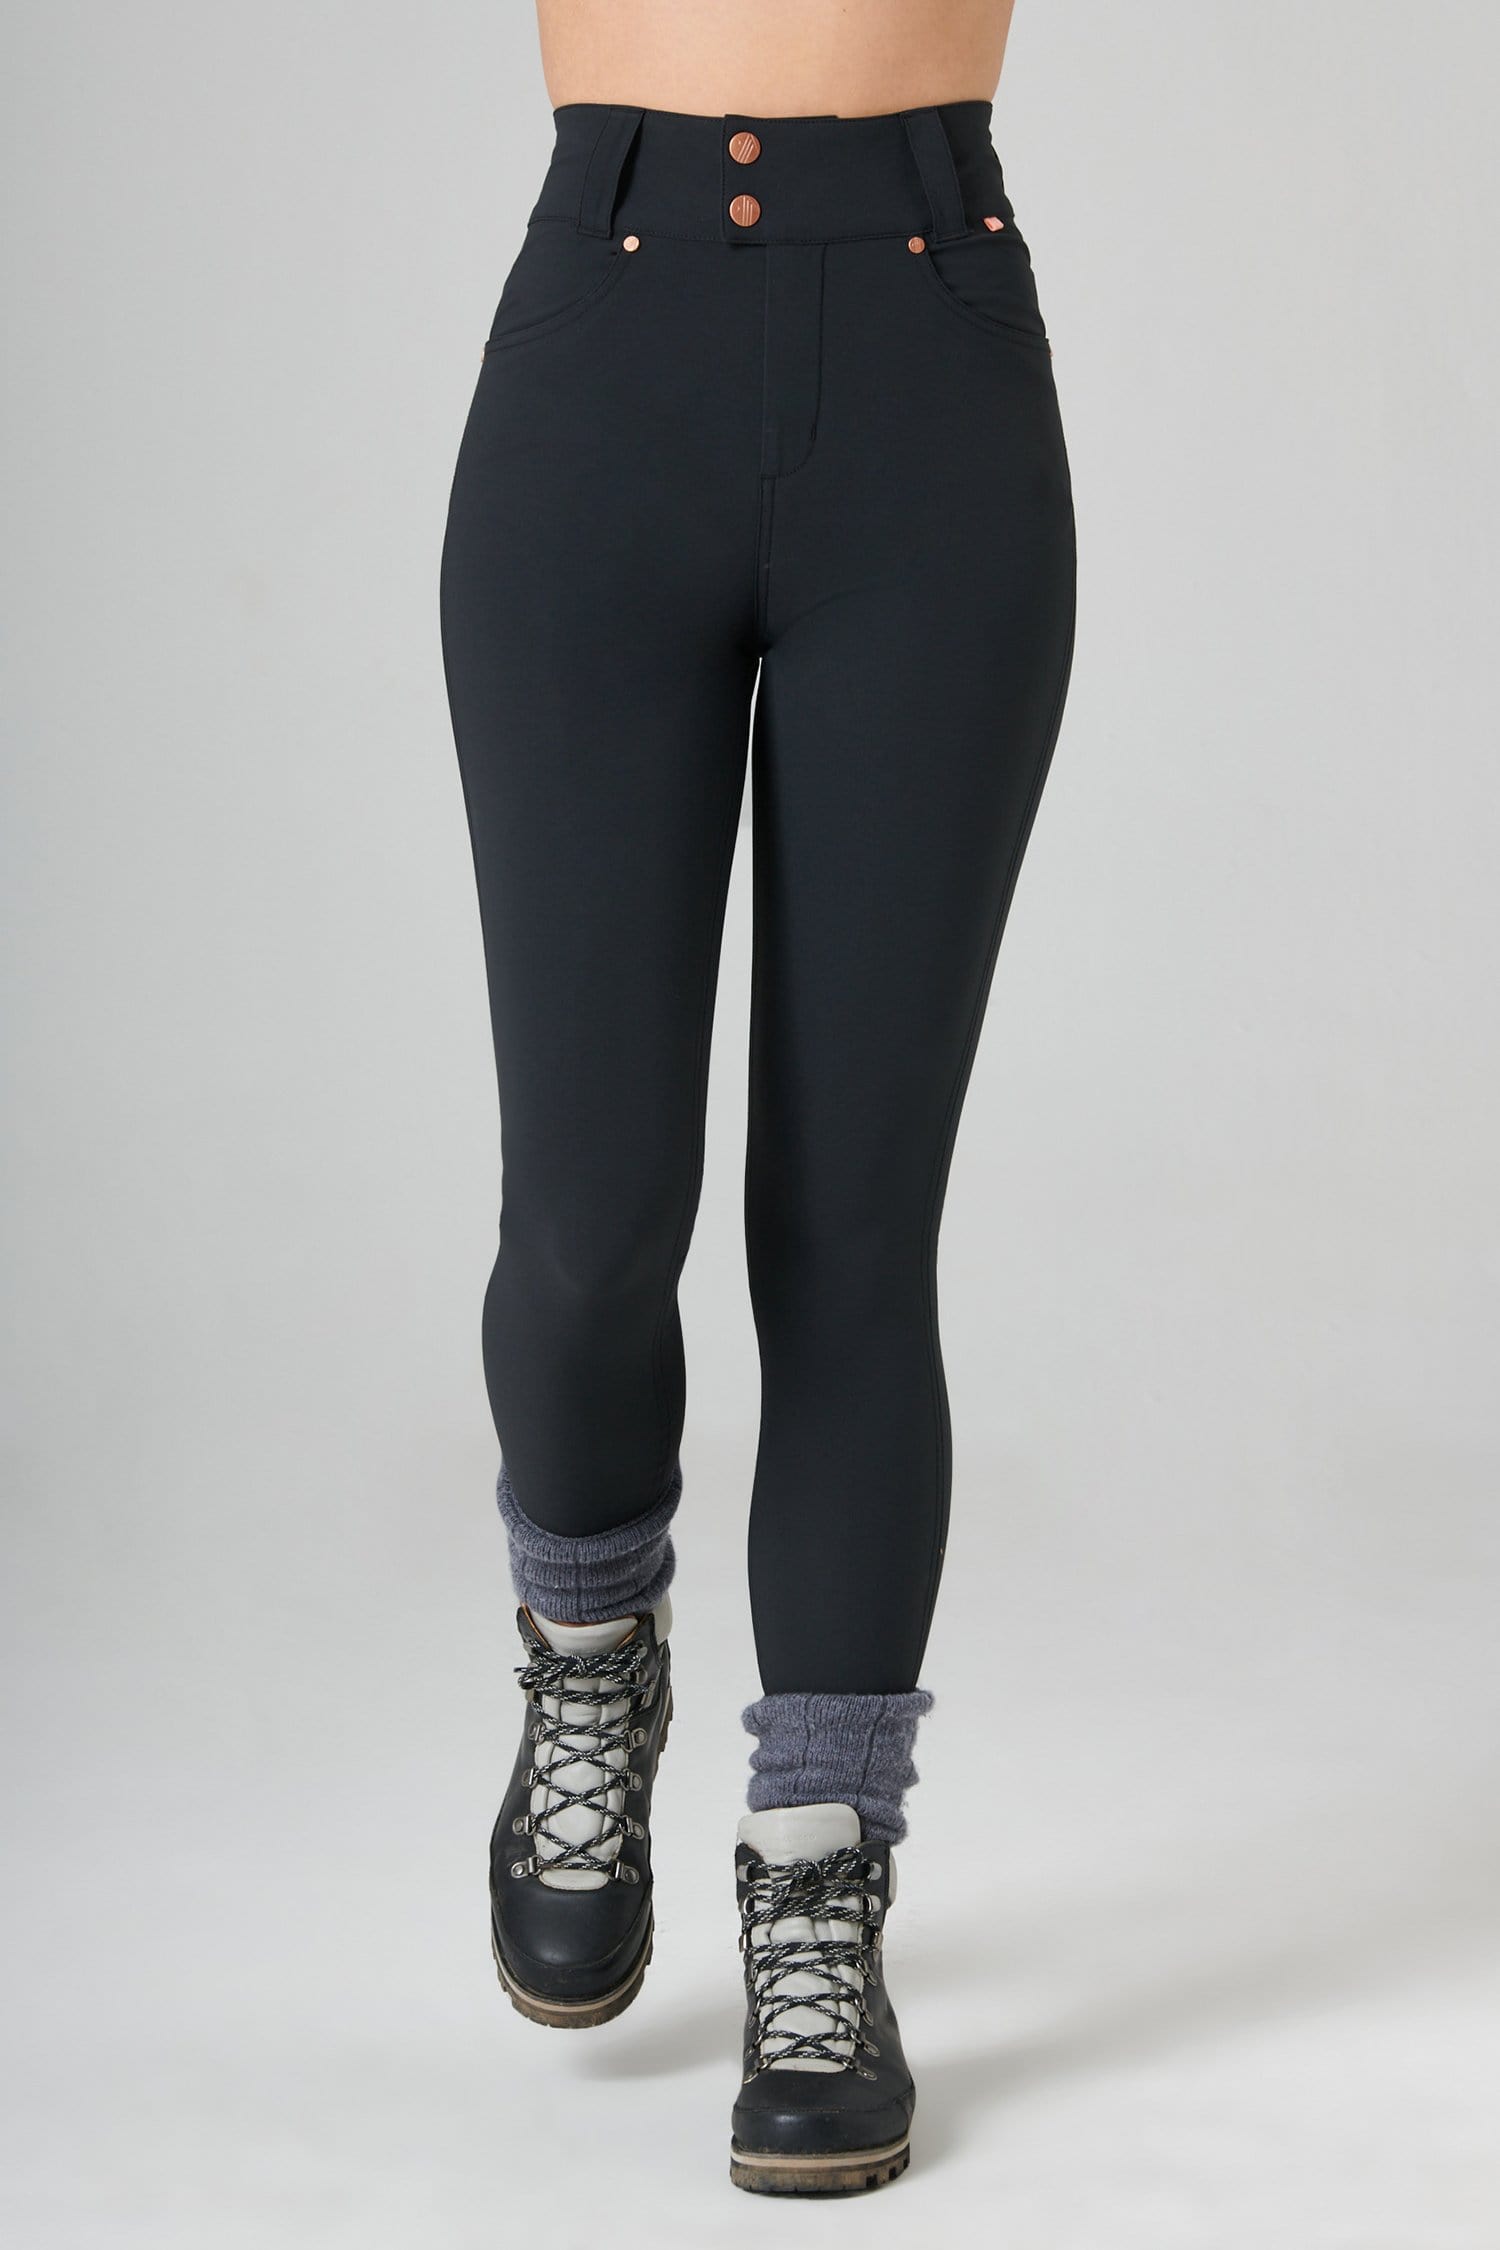 The Shape Skinny Outdoor Trousers - Black - 40r / Uk22 - Womens - Acai Outdoorwear